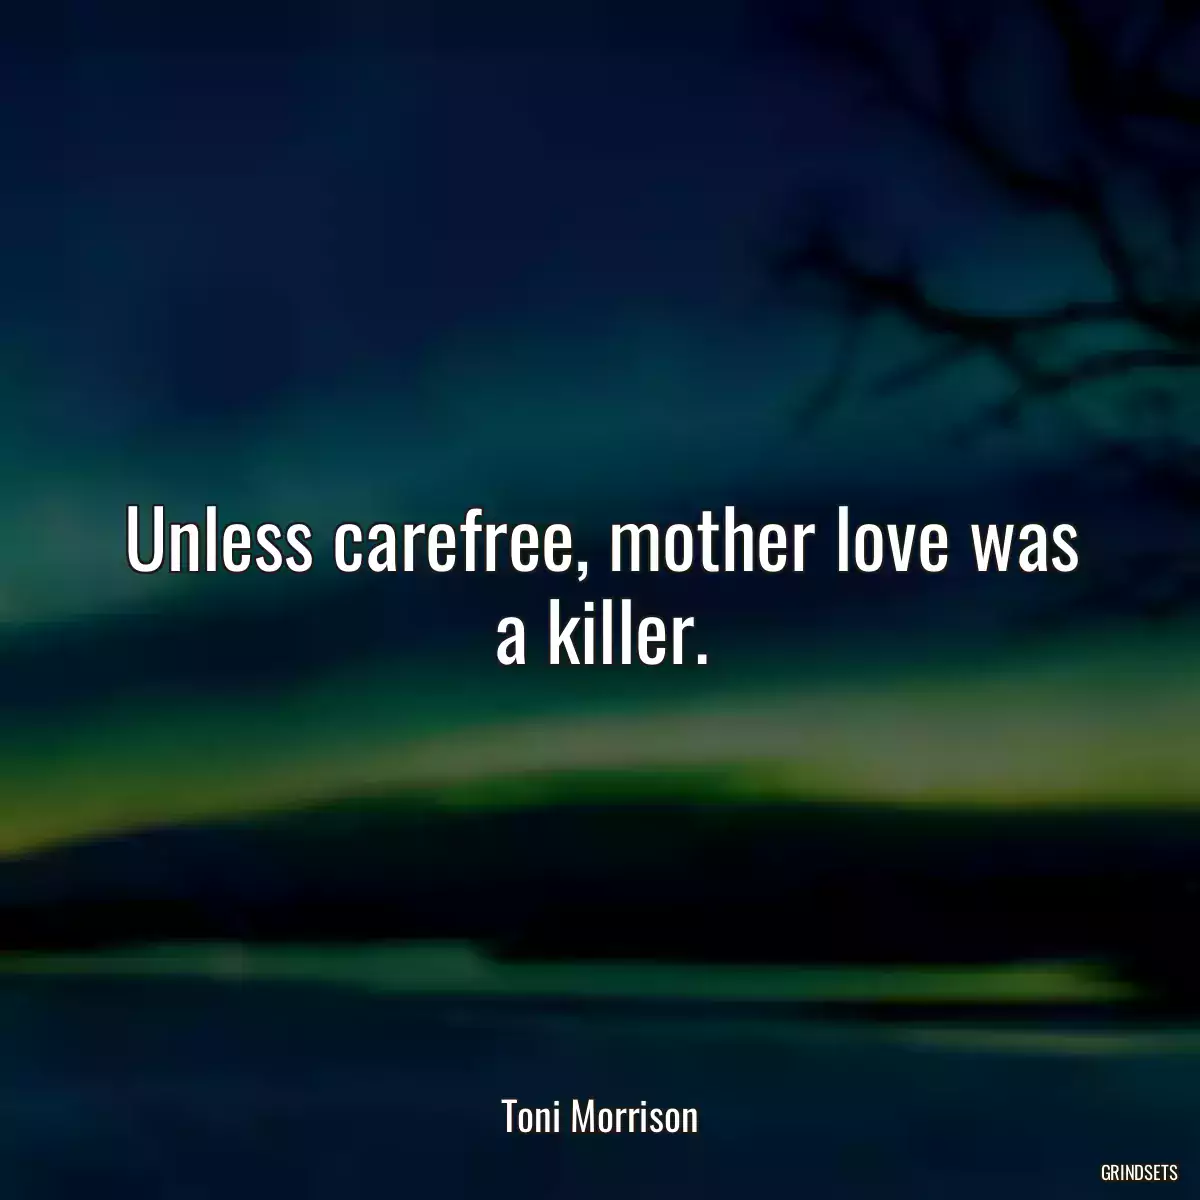 Unless carefree, mother love was a killer.